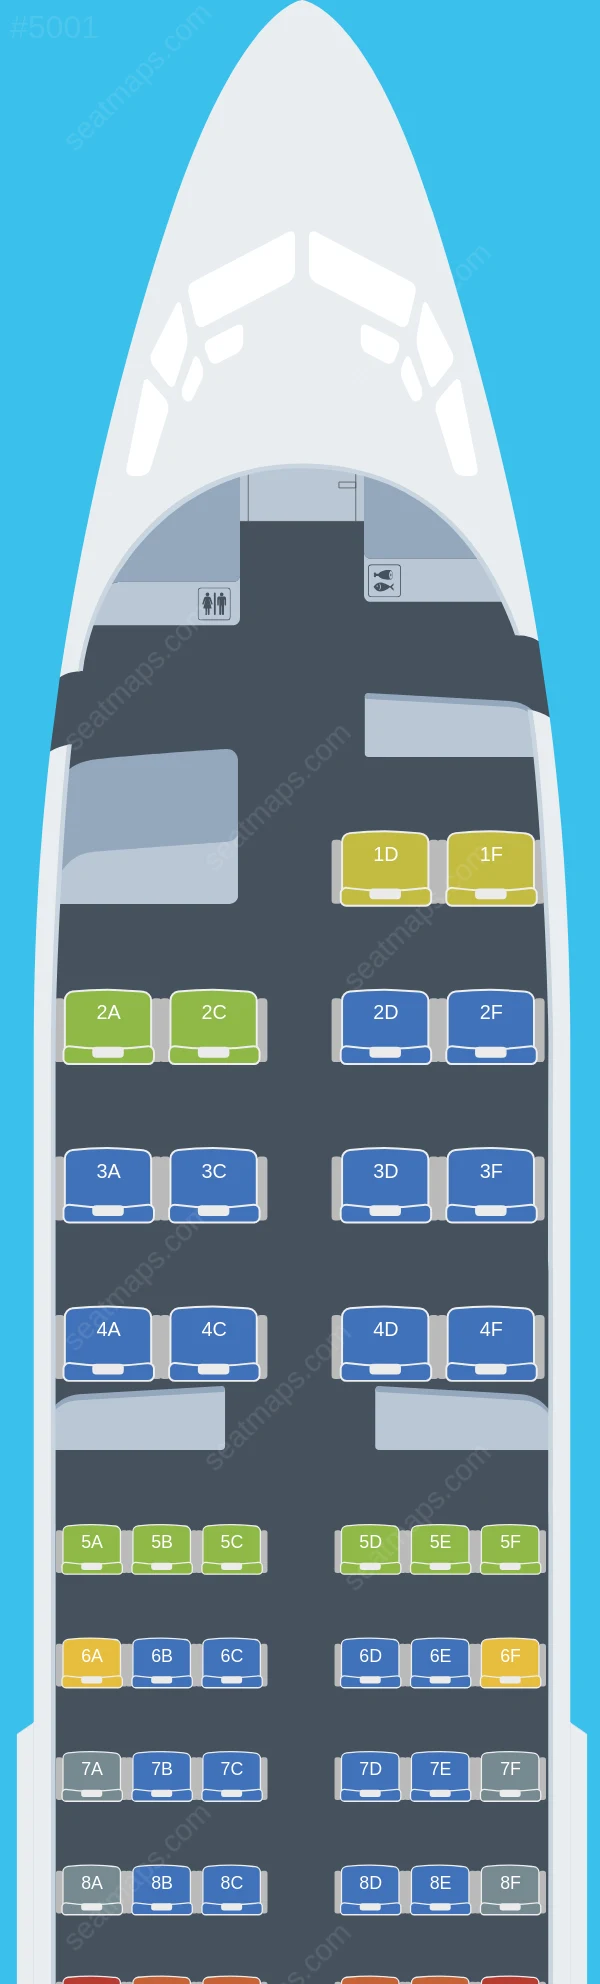 Tarom Boeing 737-700 seatmap preview